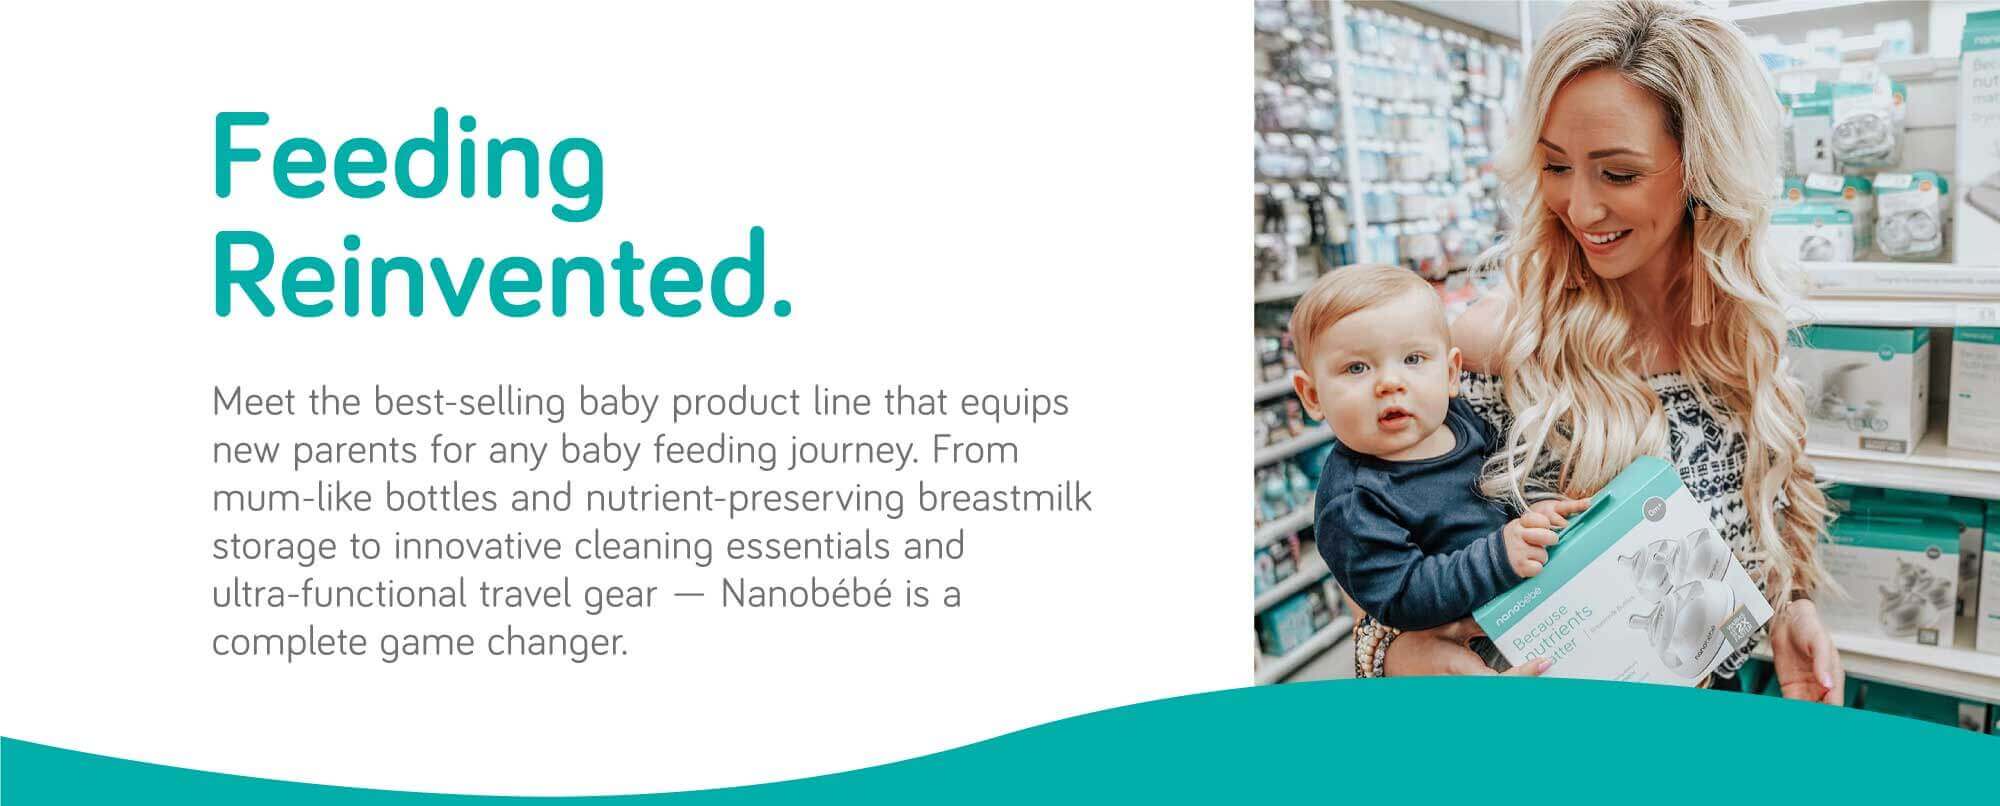 Feeding Reinvented. Meet the best-selling baby product line that equips new parents for any baby feeding journey. From mum-like bottles and nutrient-preserving breast milk storage to innovative cleaning essentials and ultra-functional travel gear, Nanobebe is a complete game changer.